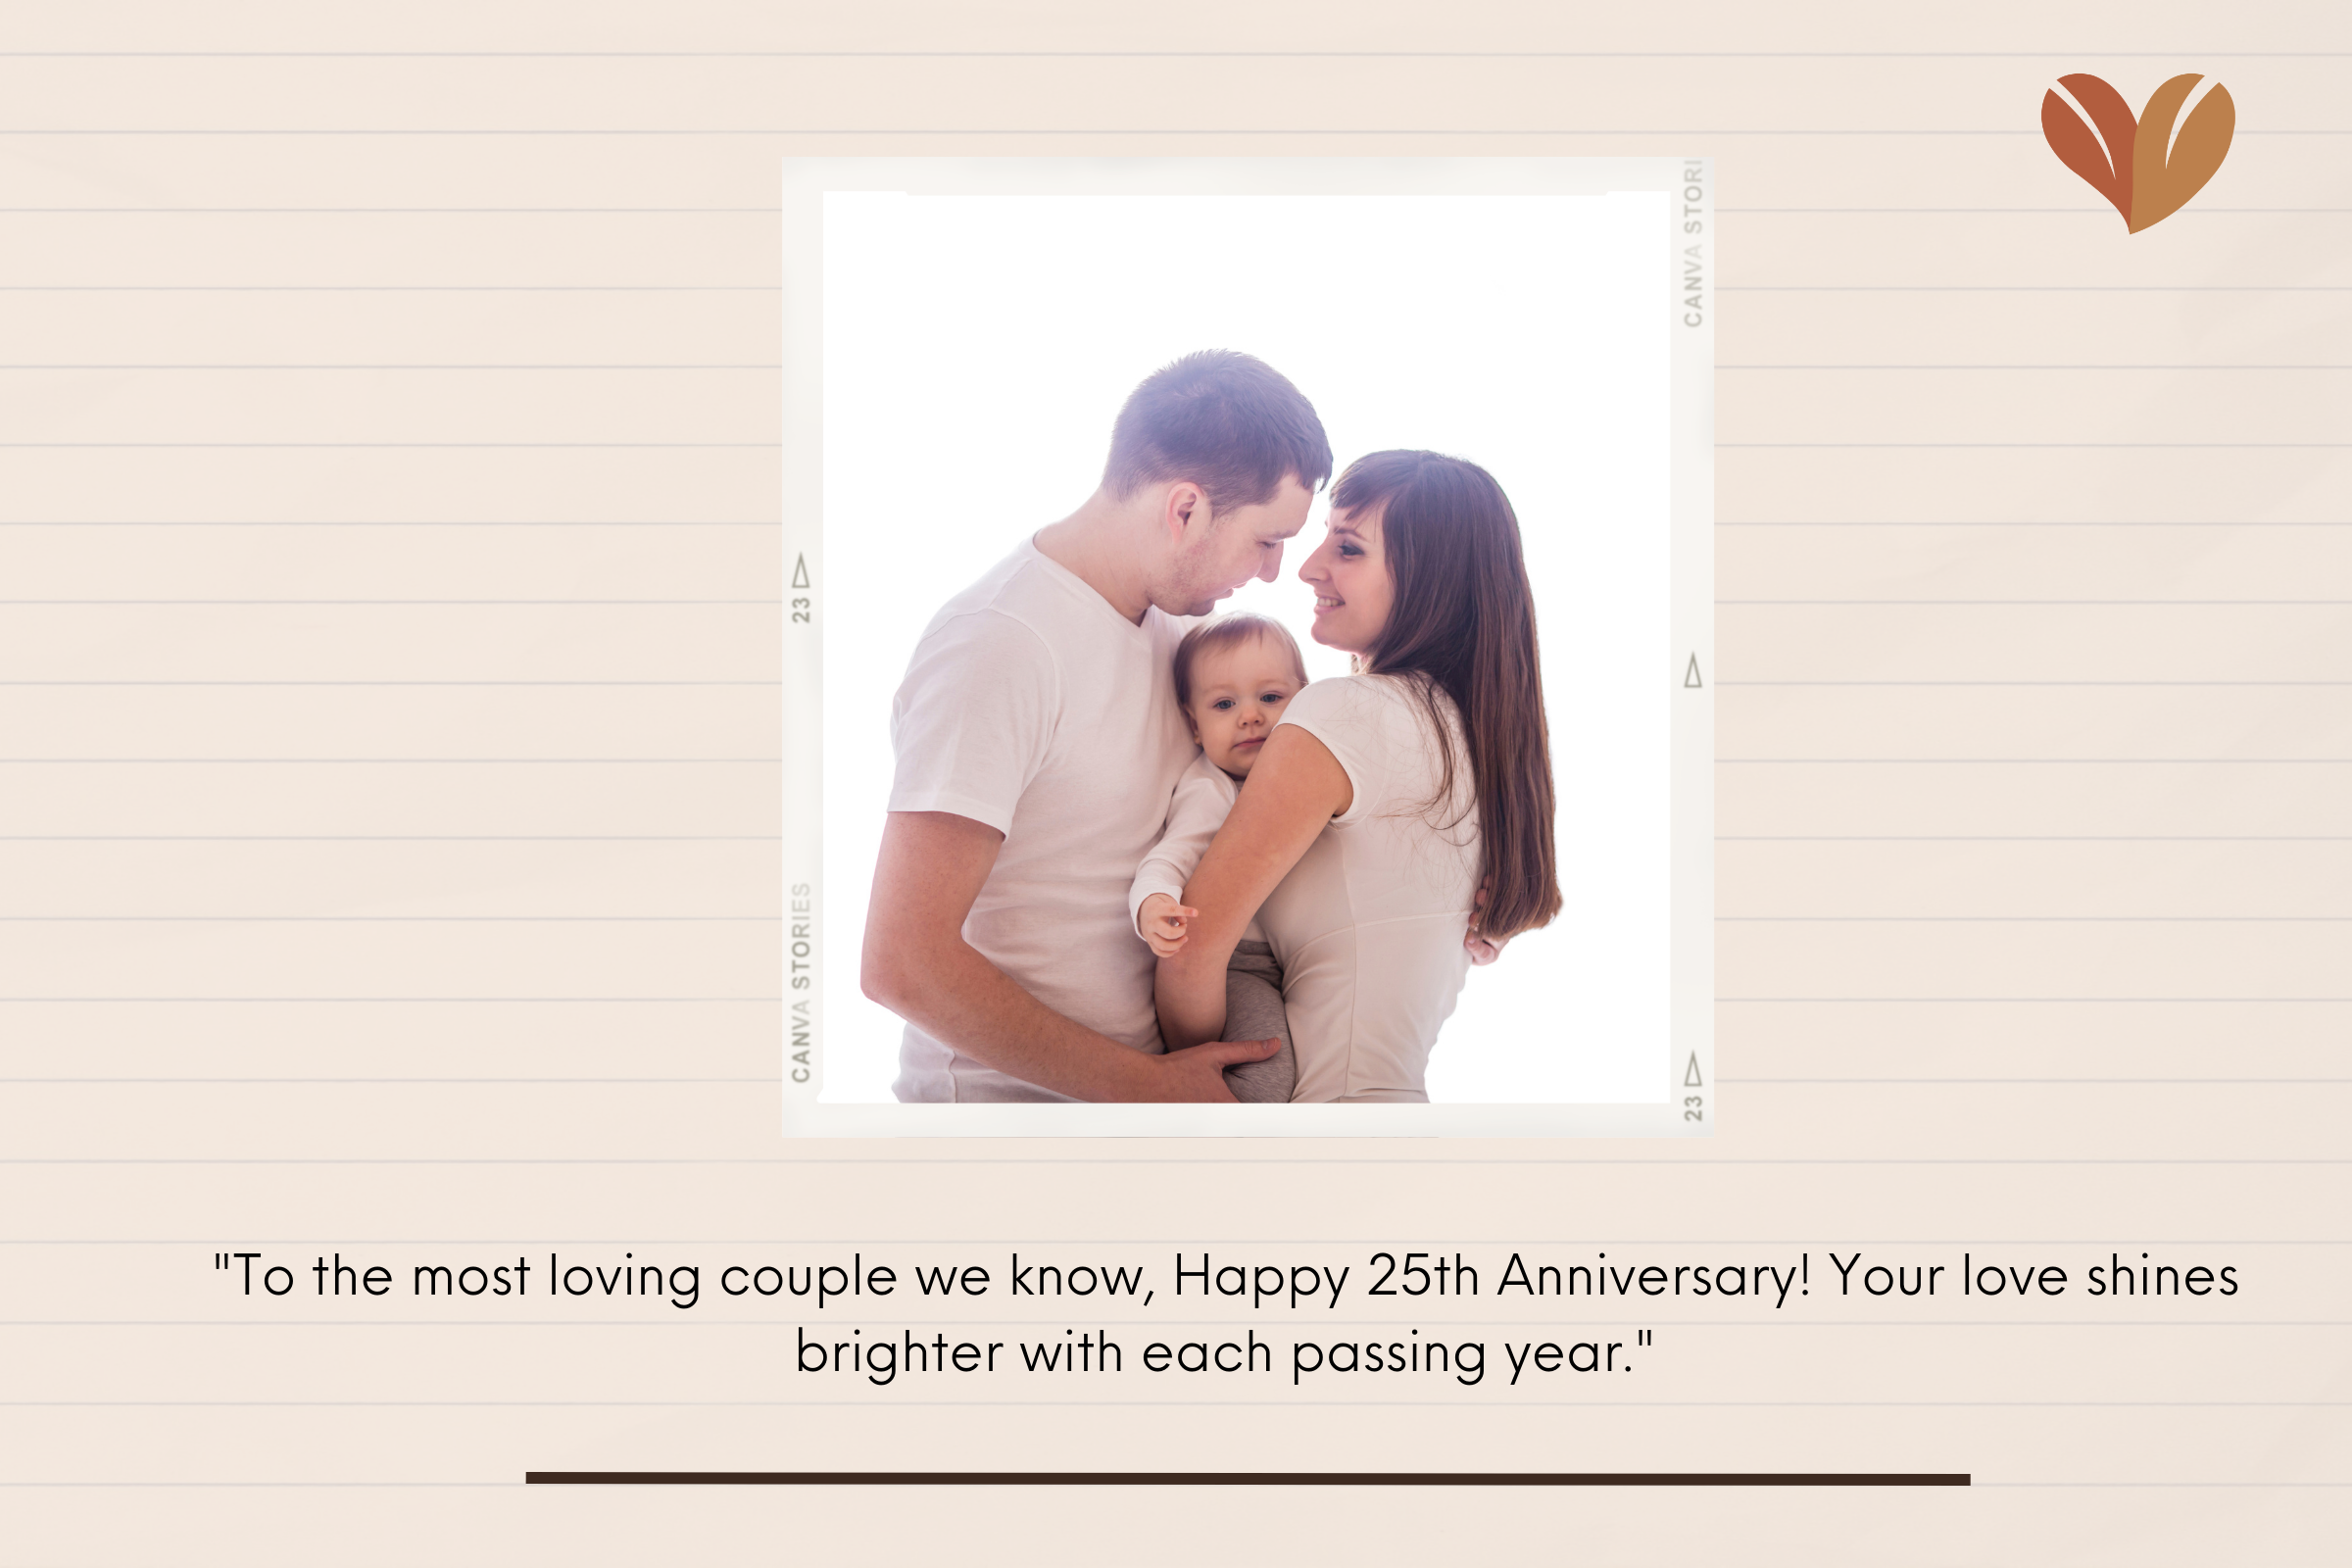 Warming wishes on anniversary for mom and dad that make them happy